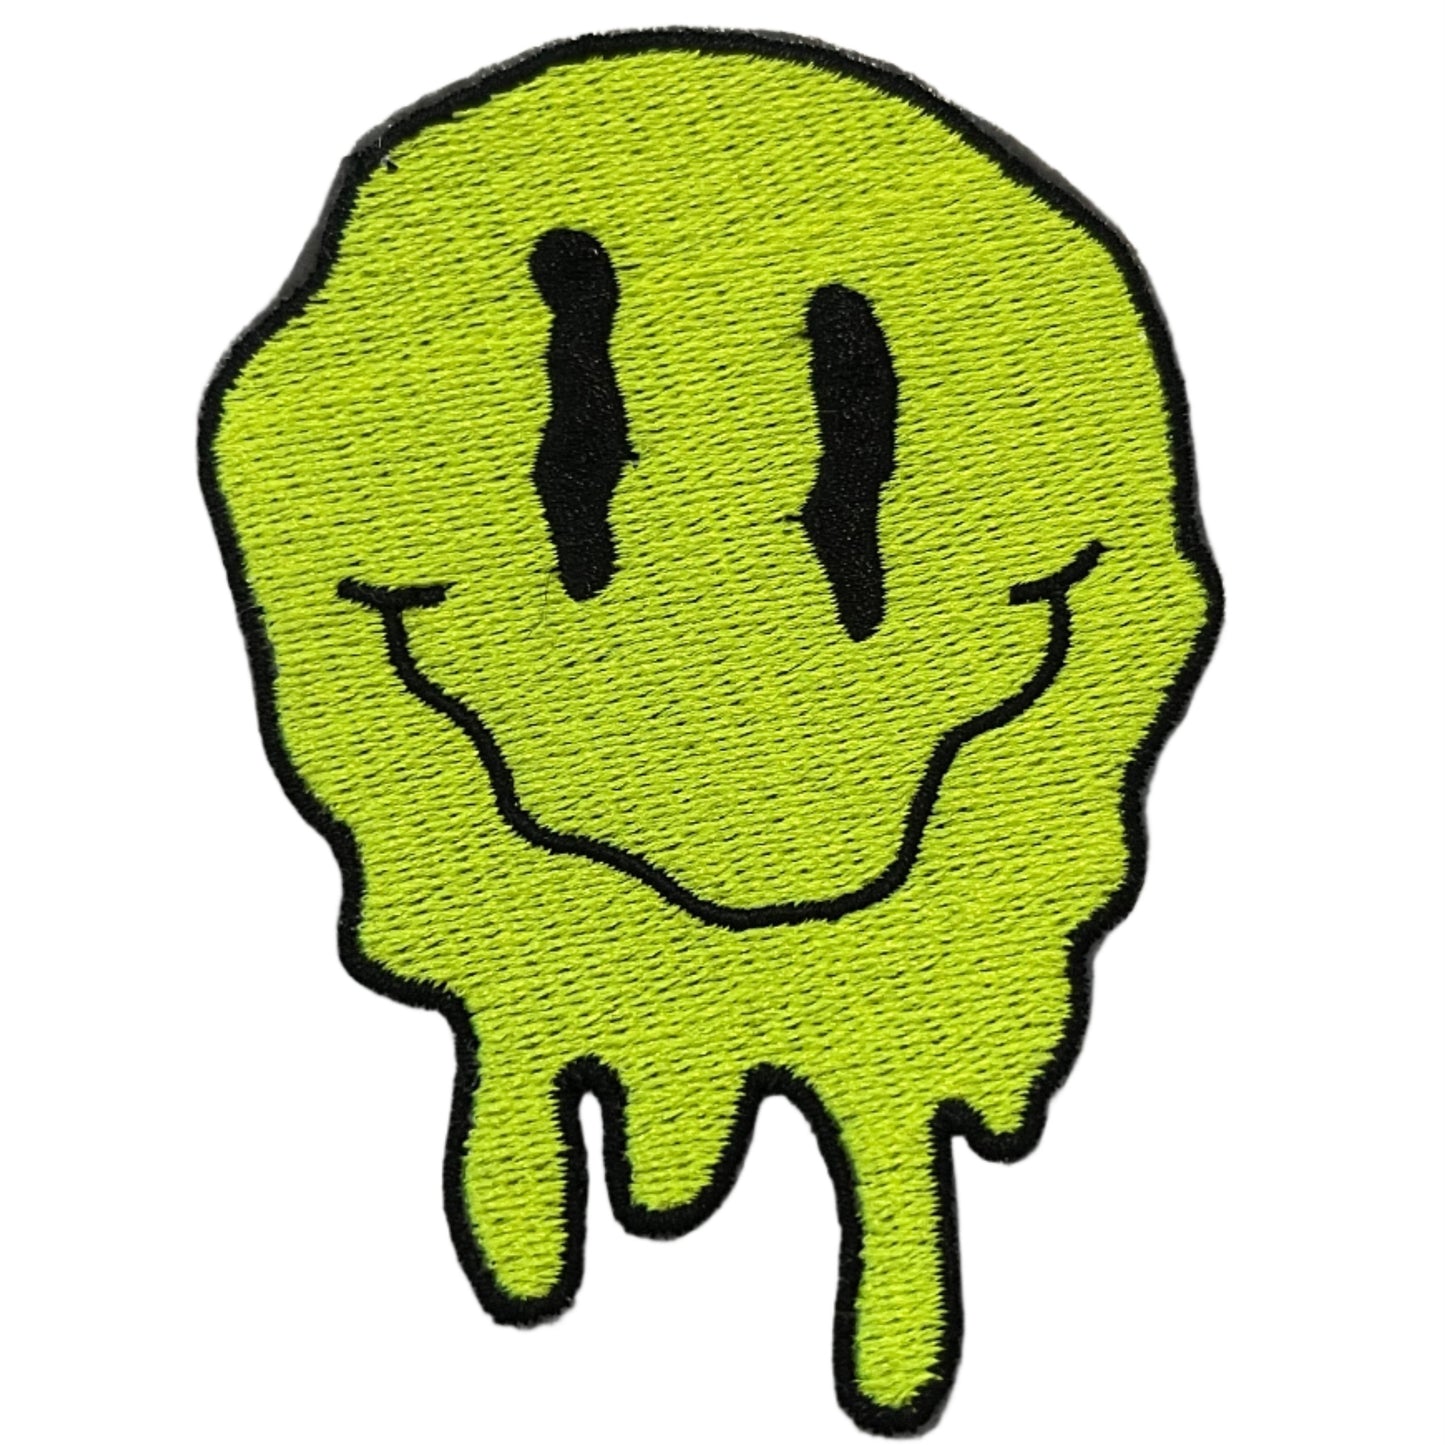 Melting Smiley Face Iron-On Patch - Edgy and Fun Retro Style